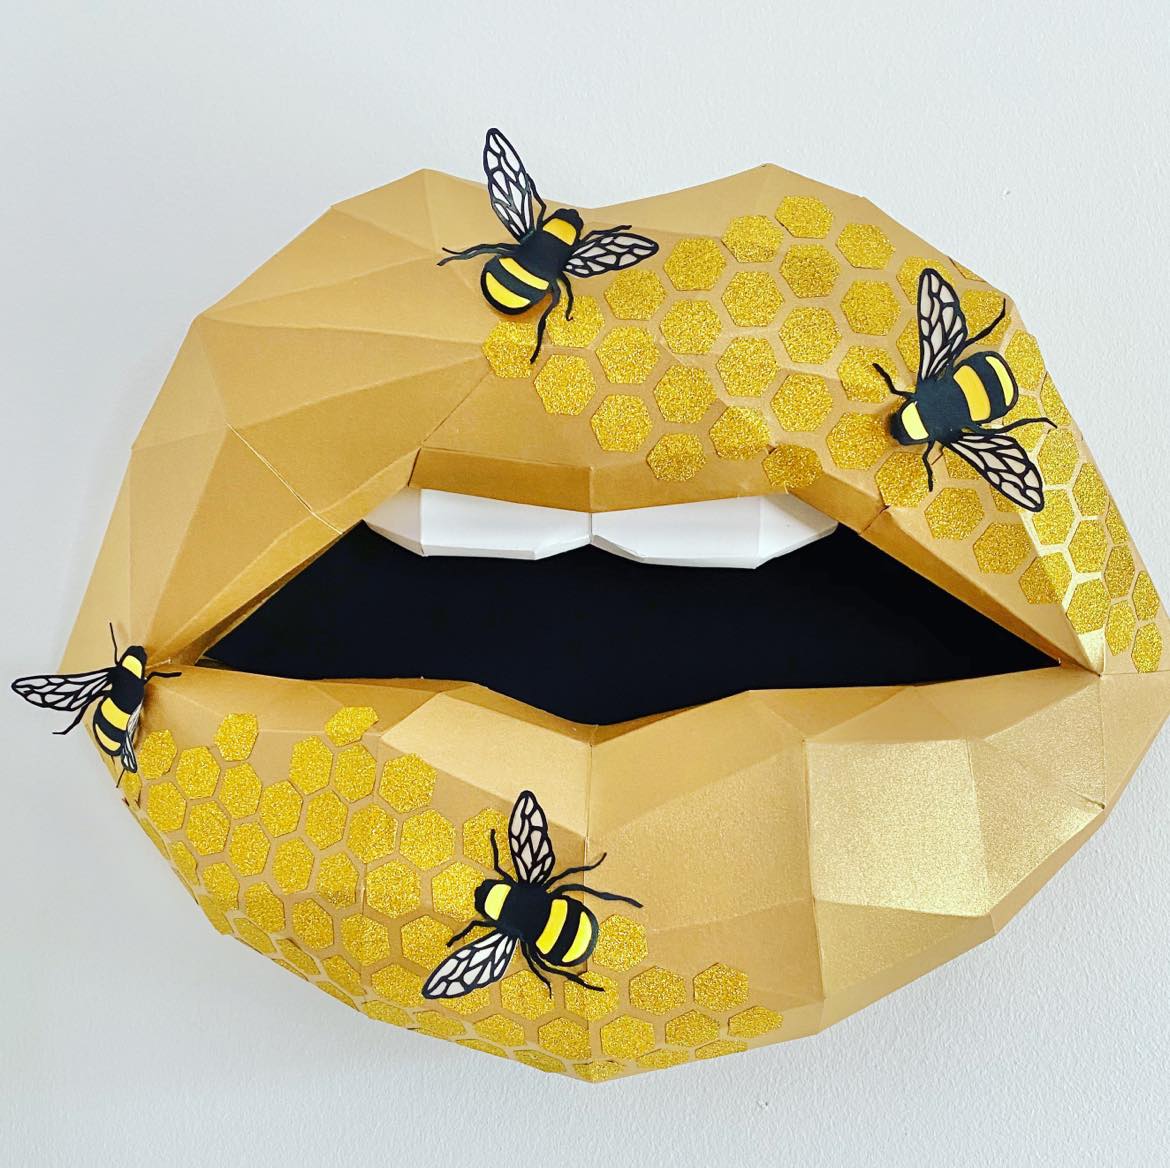 Paper Lips Bee Wall Art for Home Office or Salon